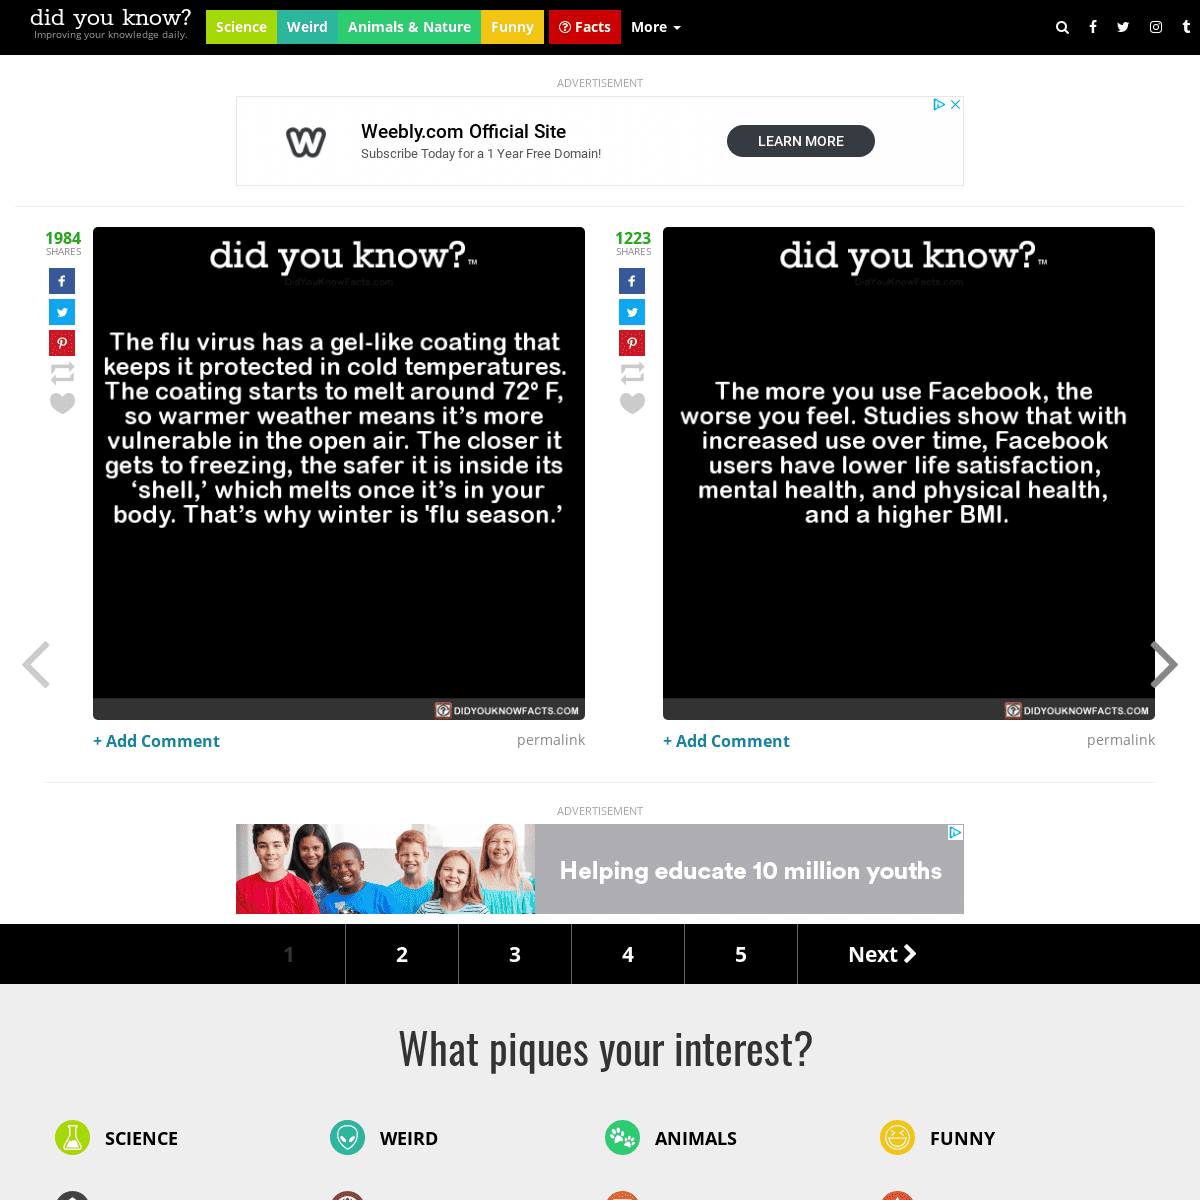 A complete backup of didyouknowblog.com